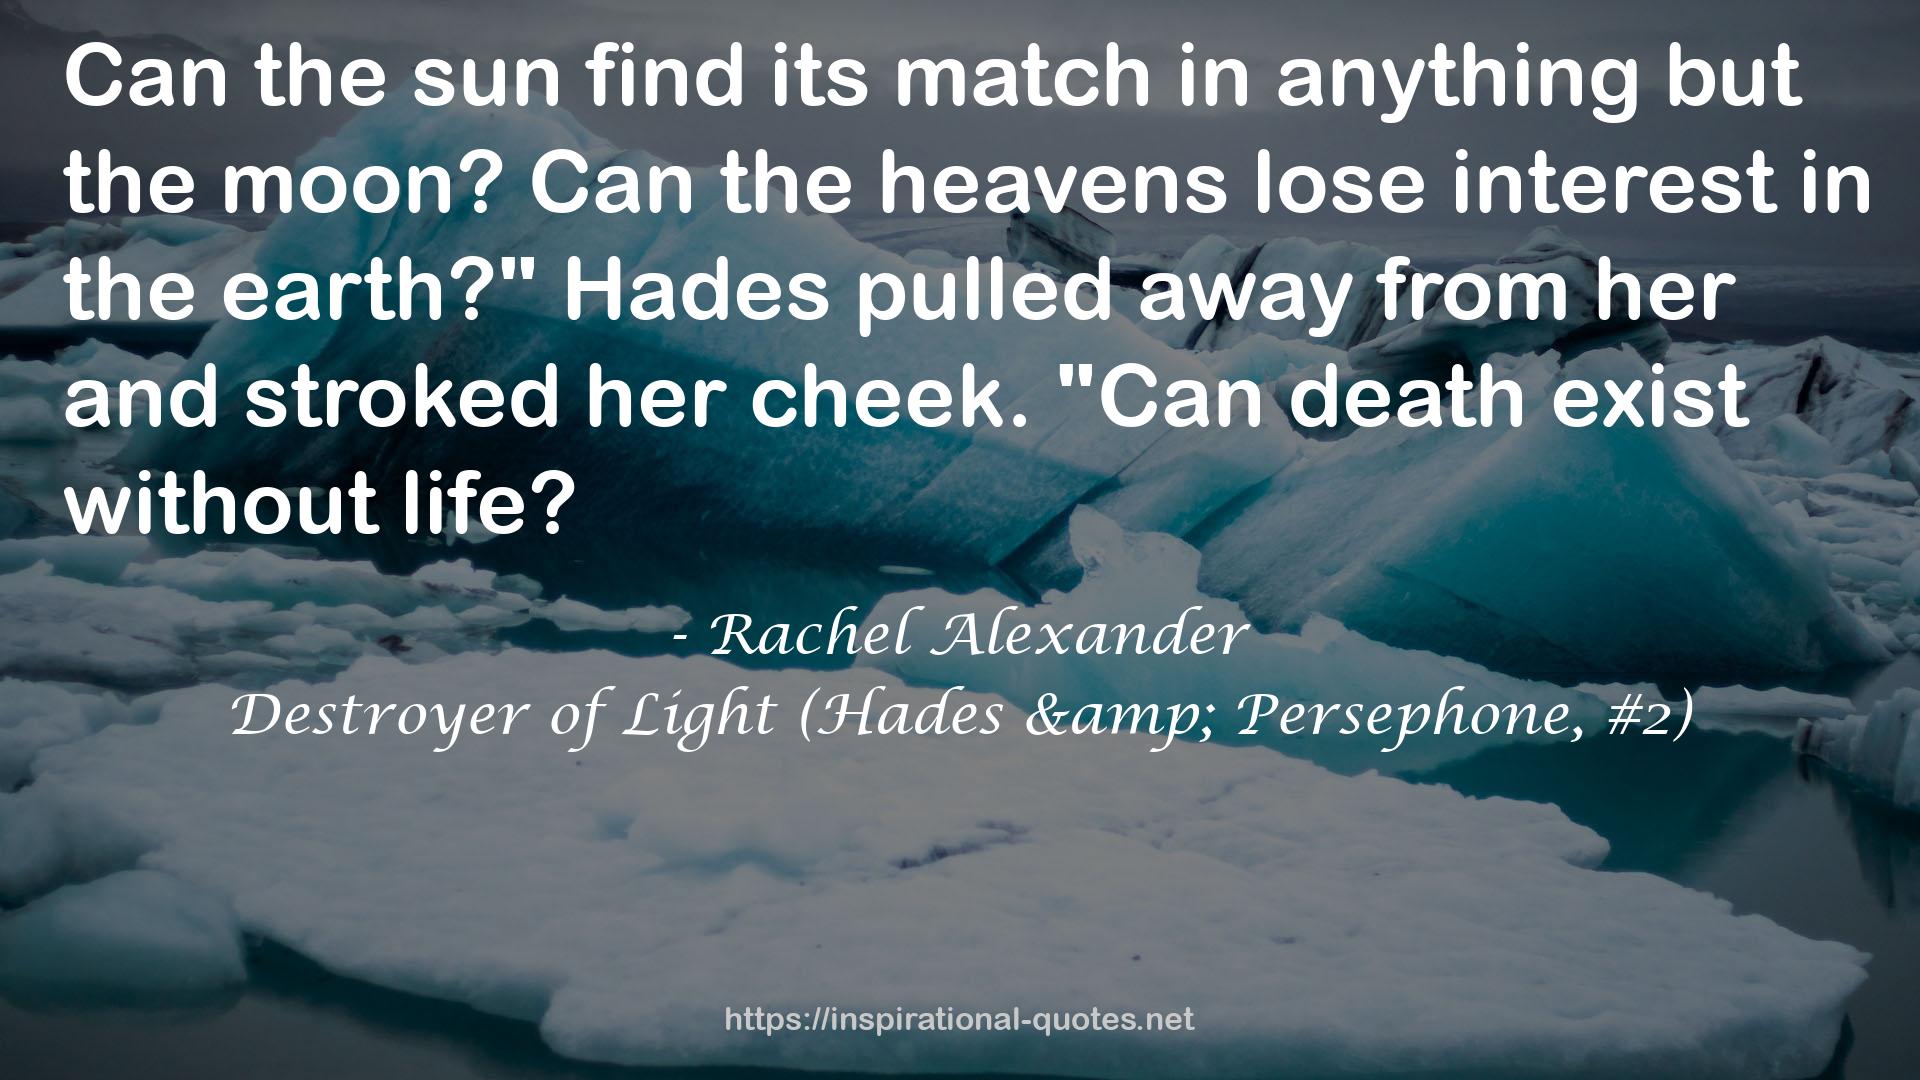 Destroyer of Light (Hades & Persephone, #2) QUOTES